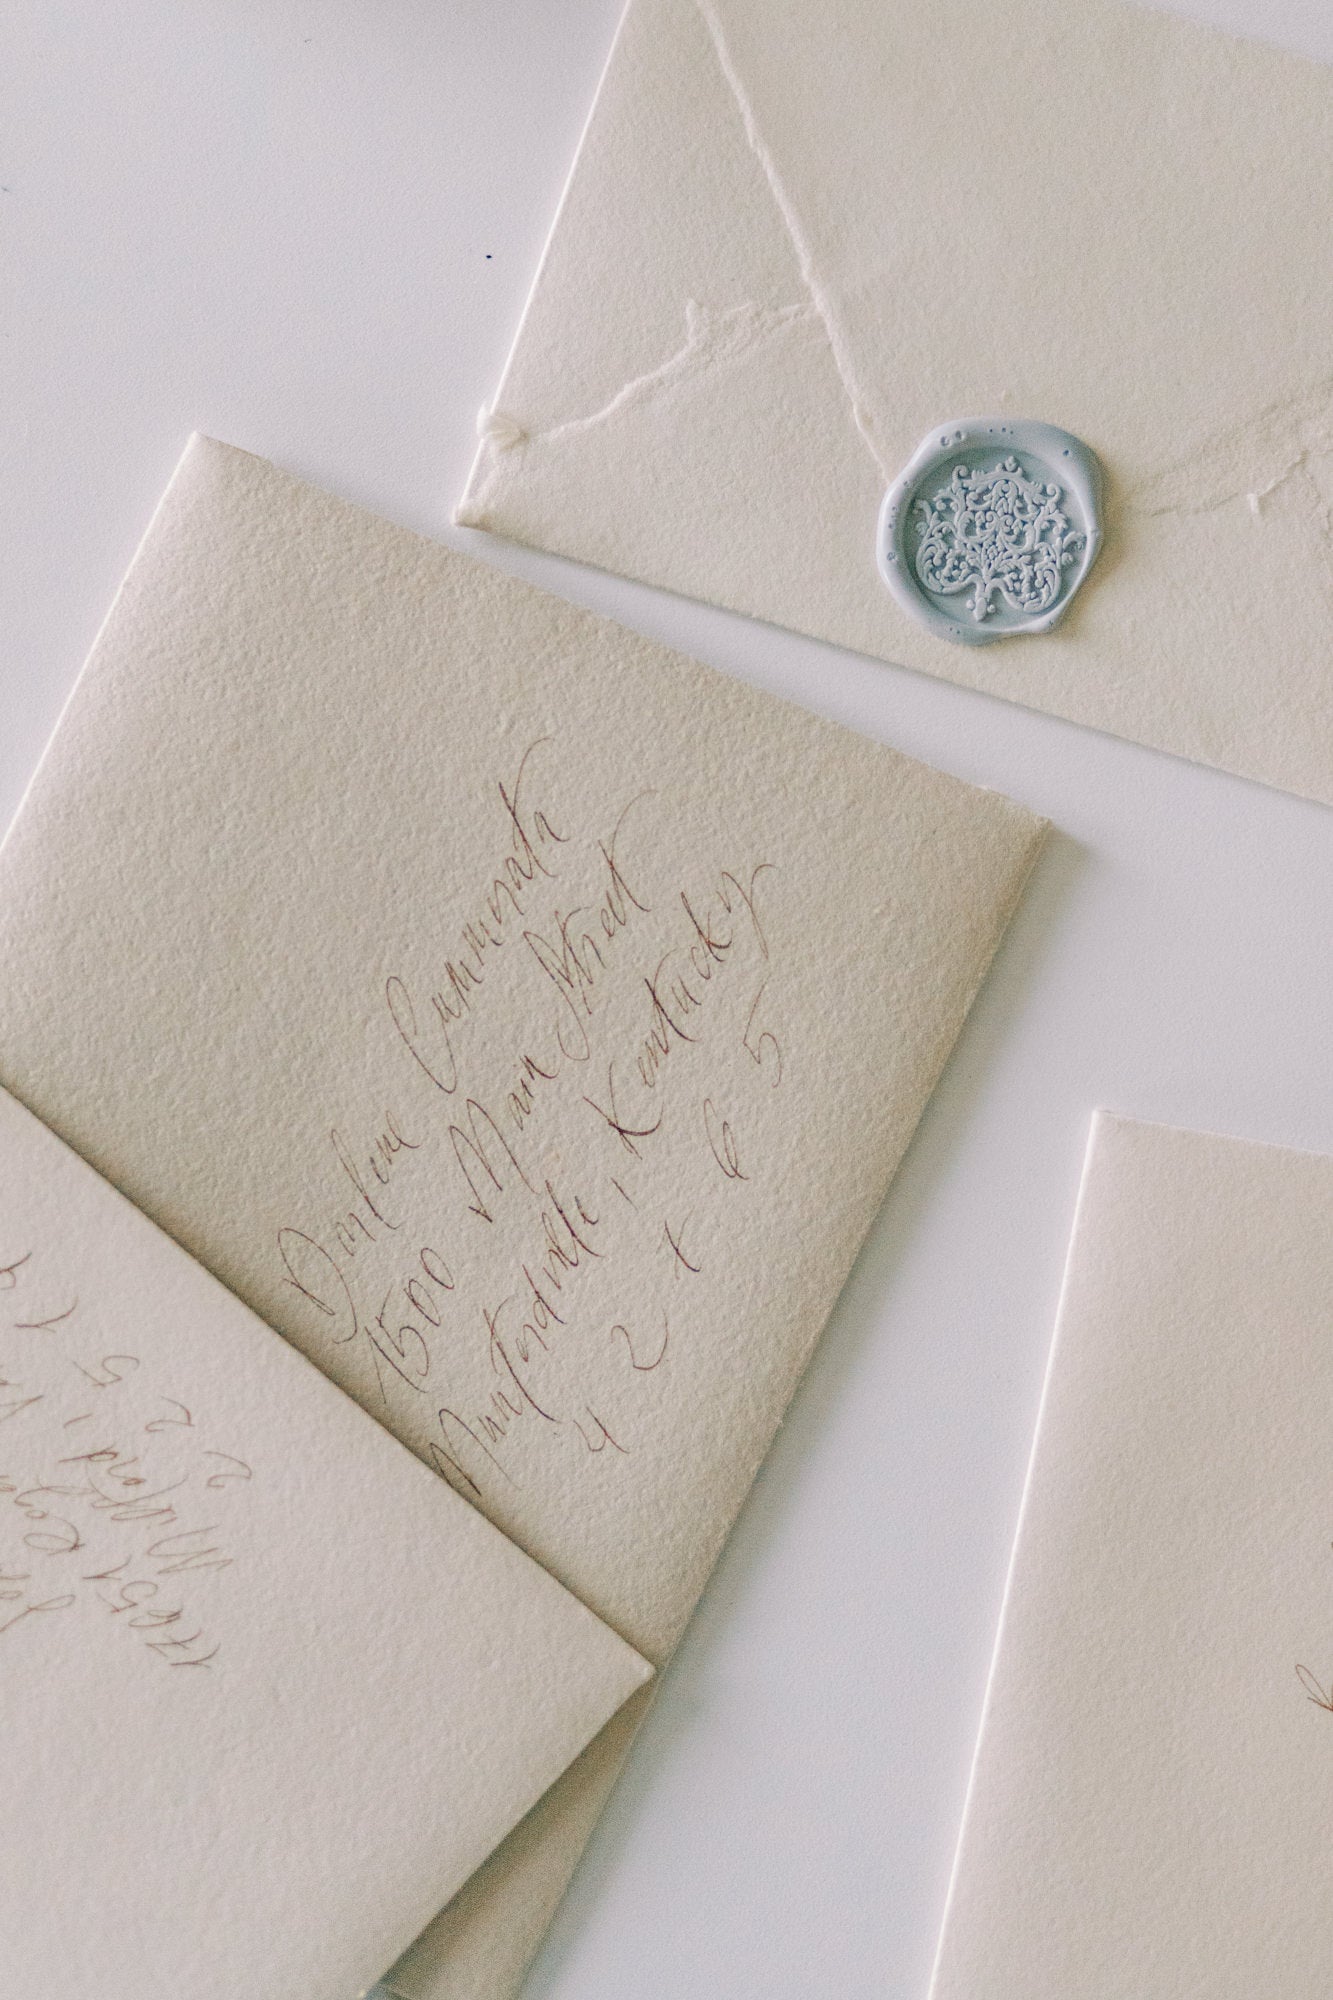 Achieve elegant calligraphy results with Brause & Co No. 31 EF nib on handmade paper.